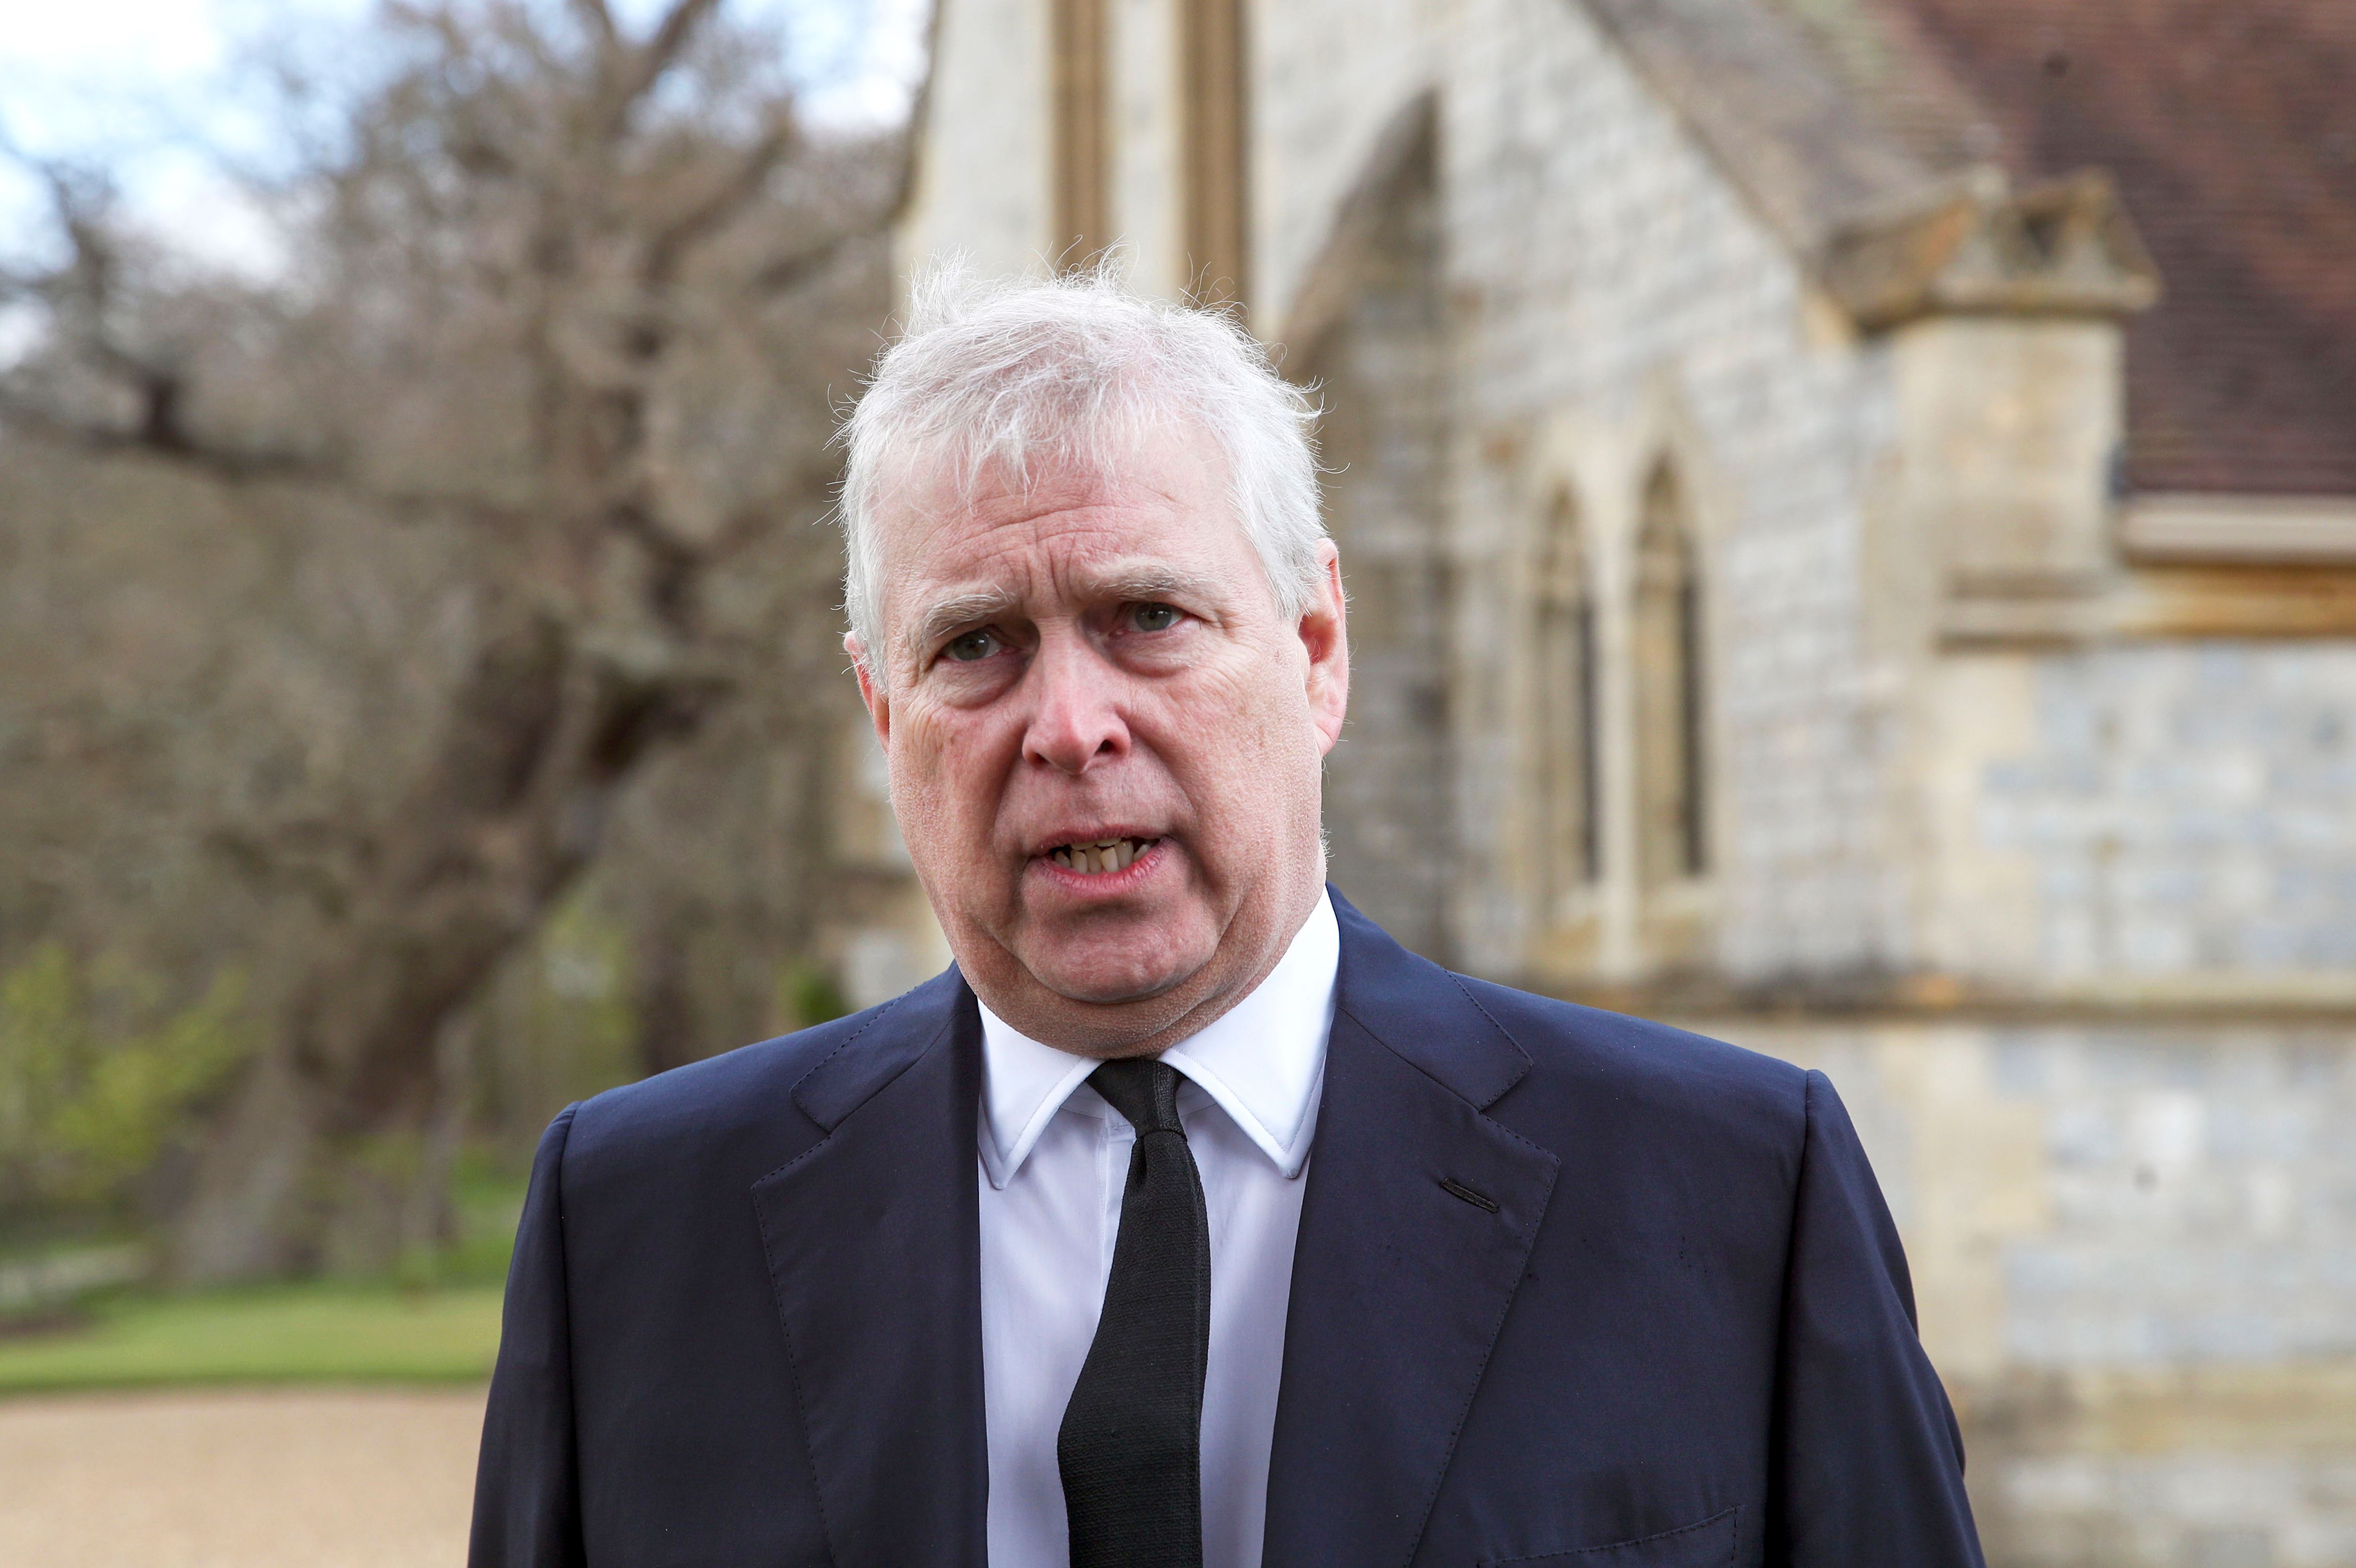 Prince Andrew at the Sunday Service at the Royal Chapel of All Saints, Windsor on April 11, 2021 | Getty Images 